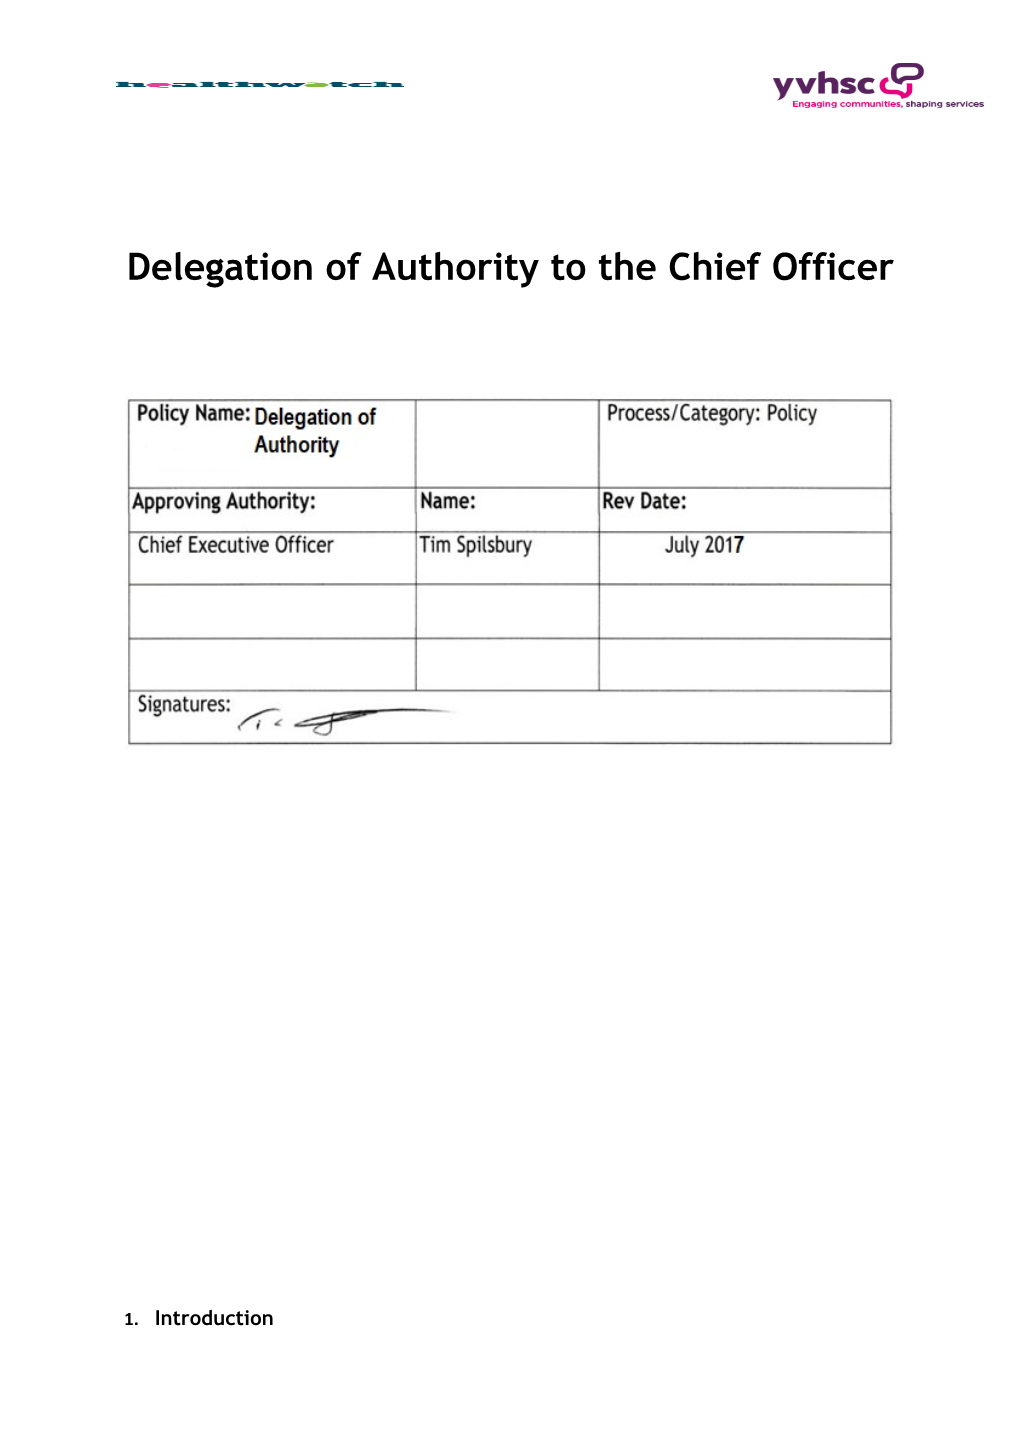 Delegation of Authorityto the Chief Officer